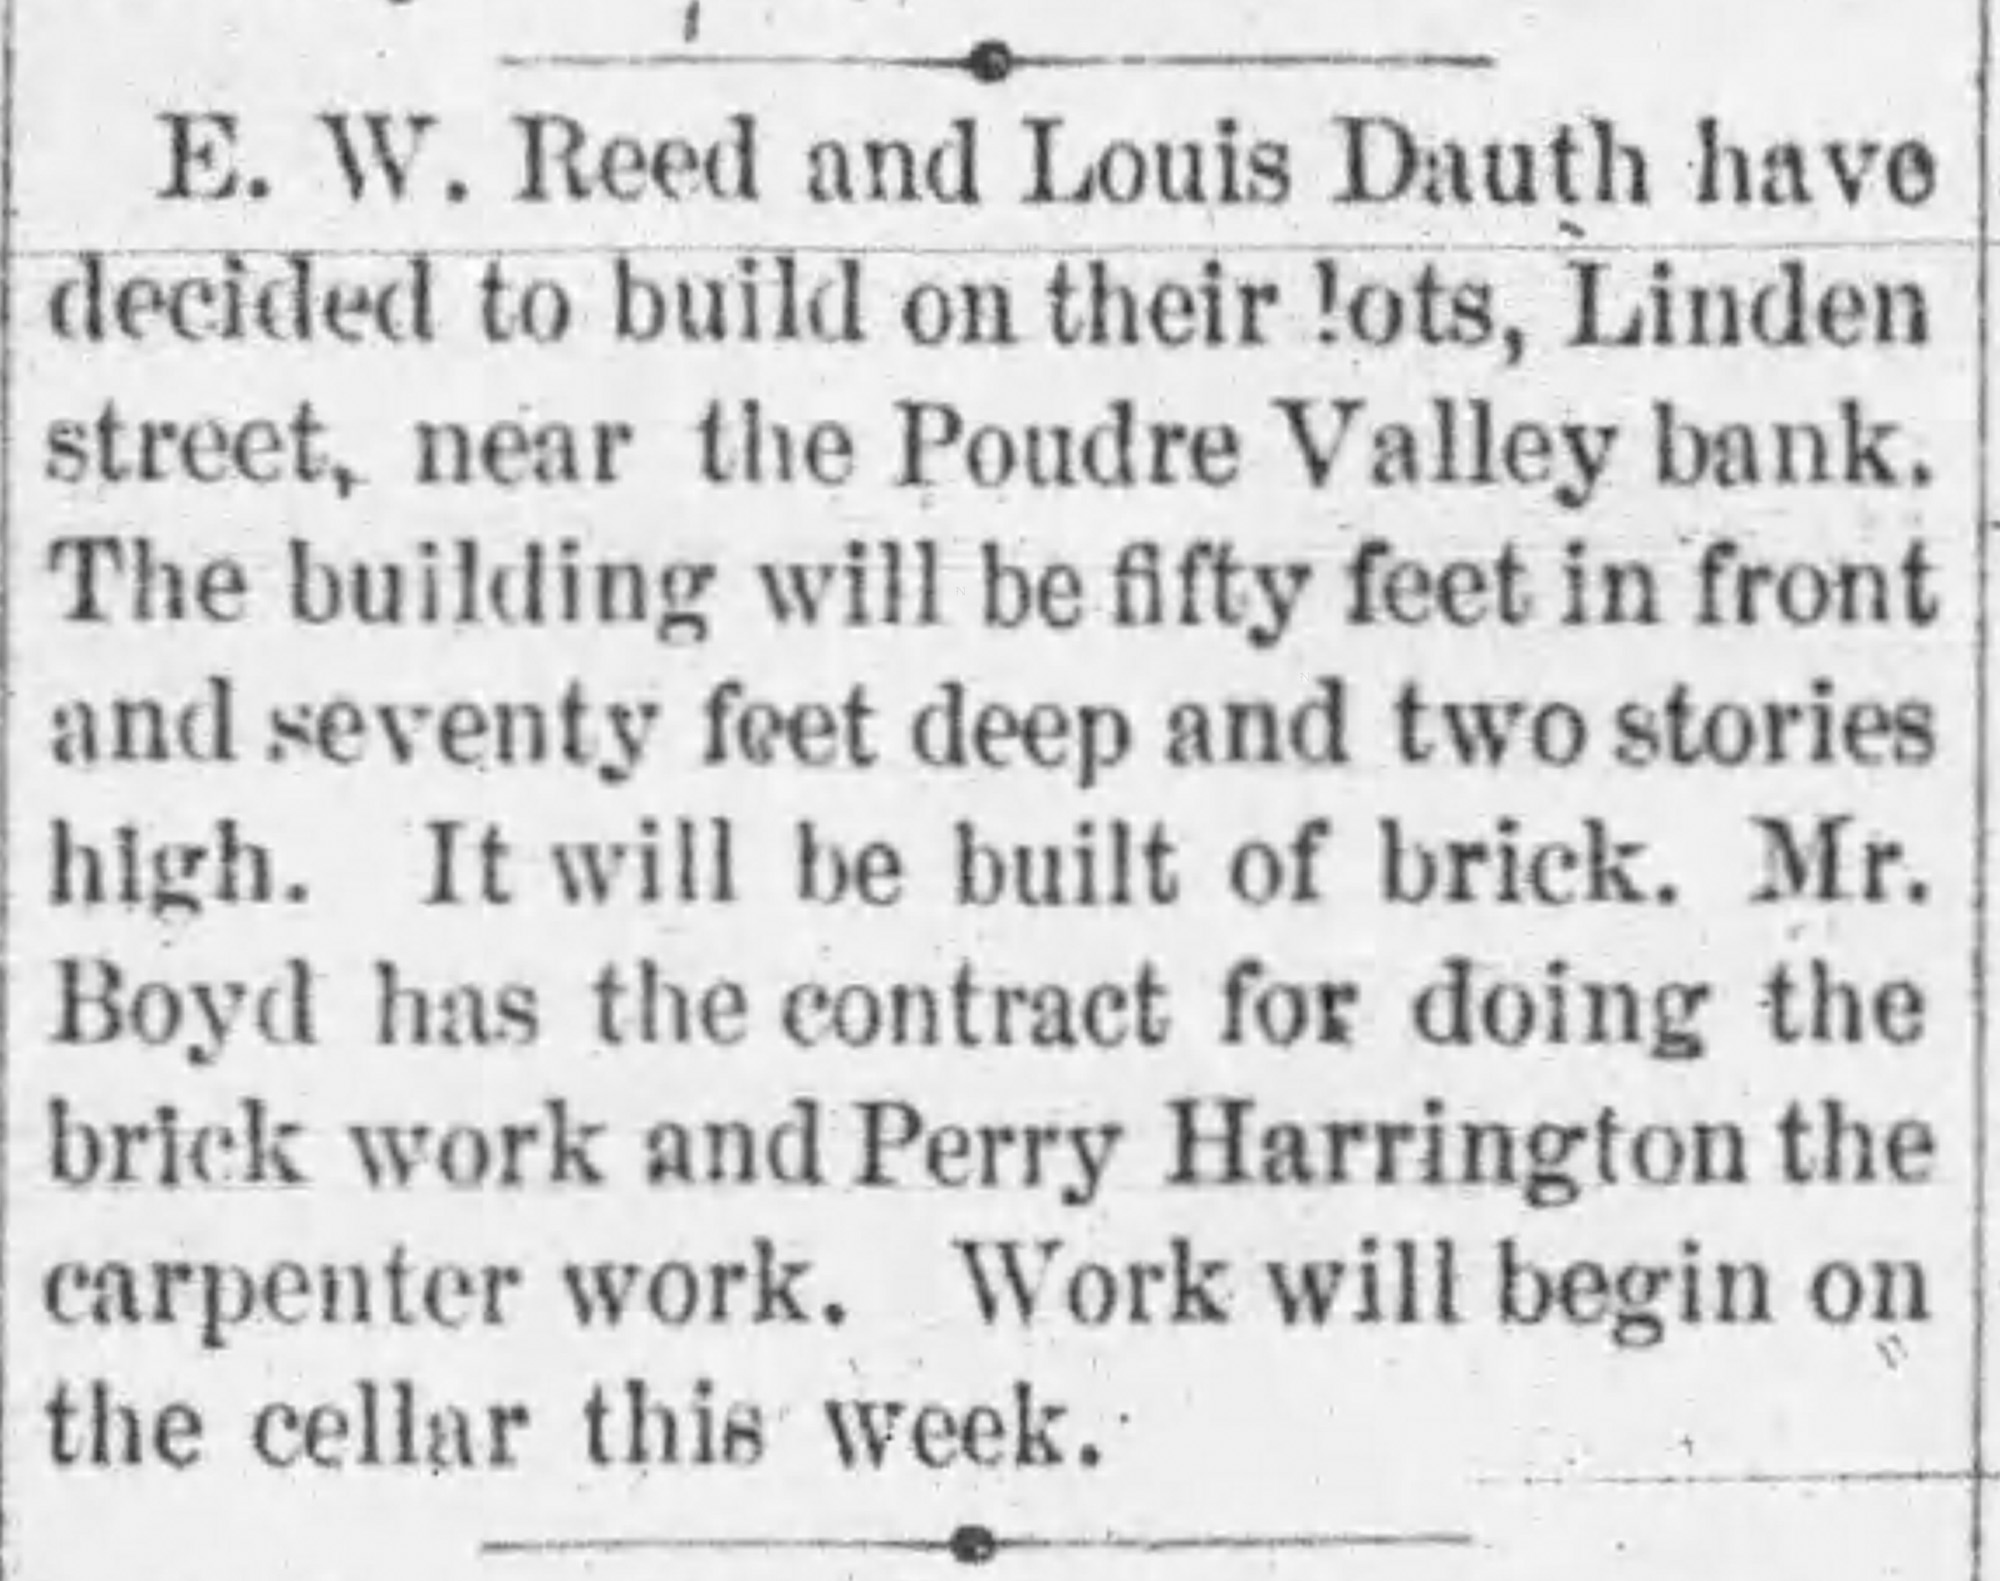 Dauth Family Archive - 1881-03-24 - Express - Louis Dauth Reed-Dauth Block Contractor